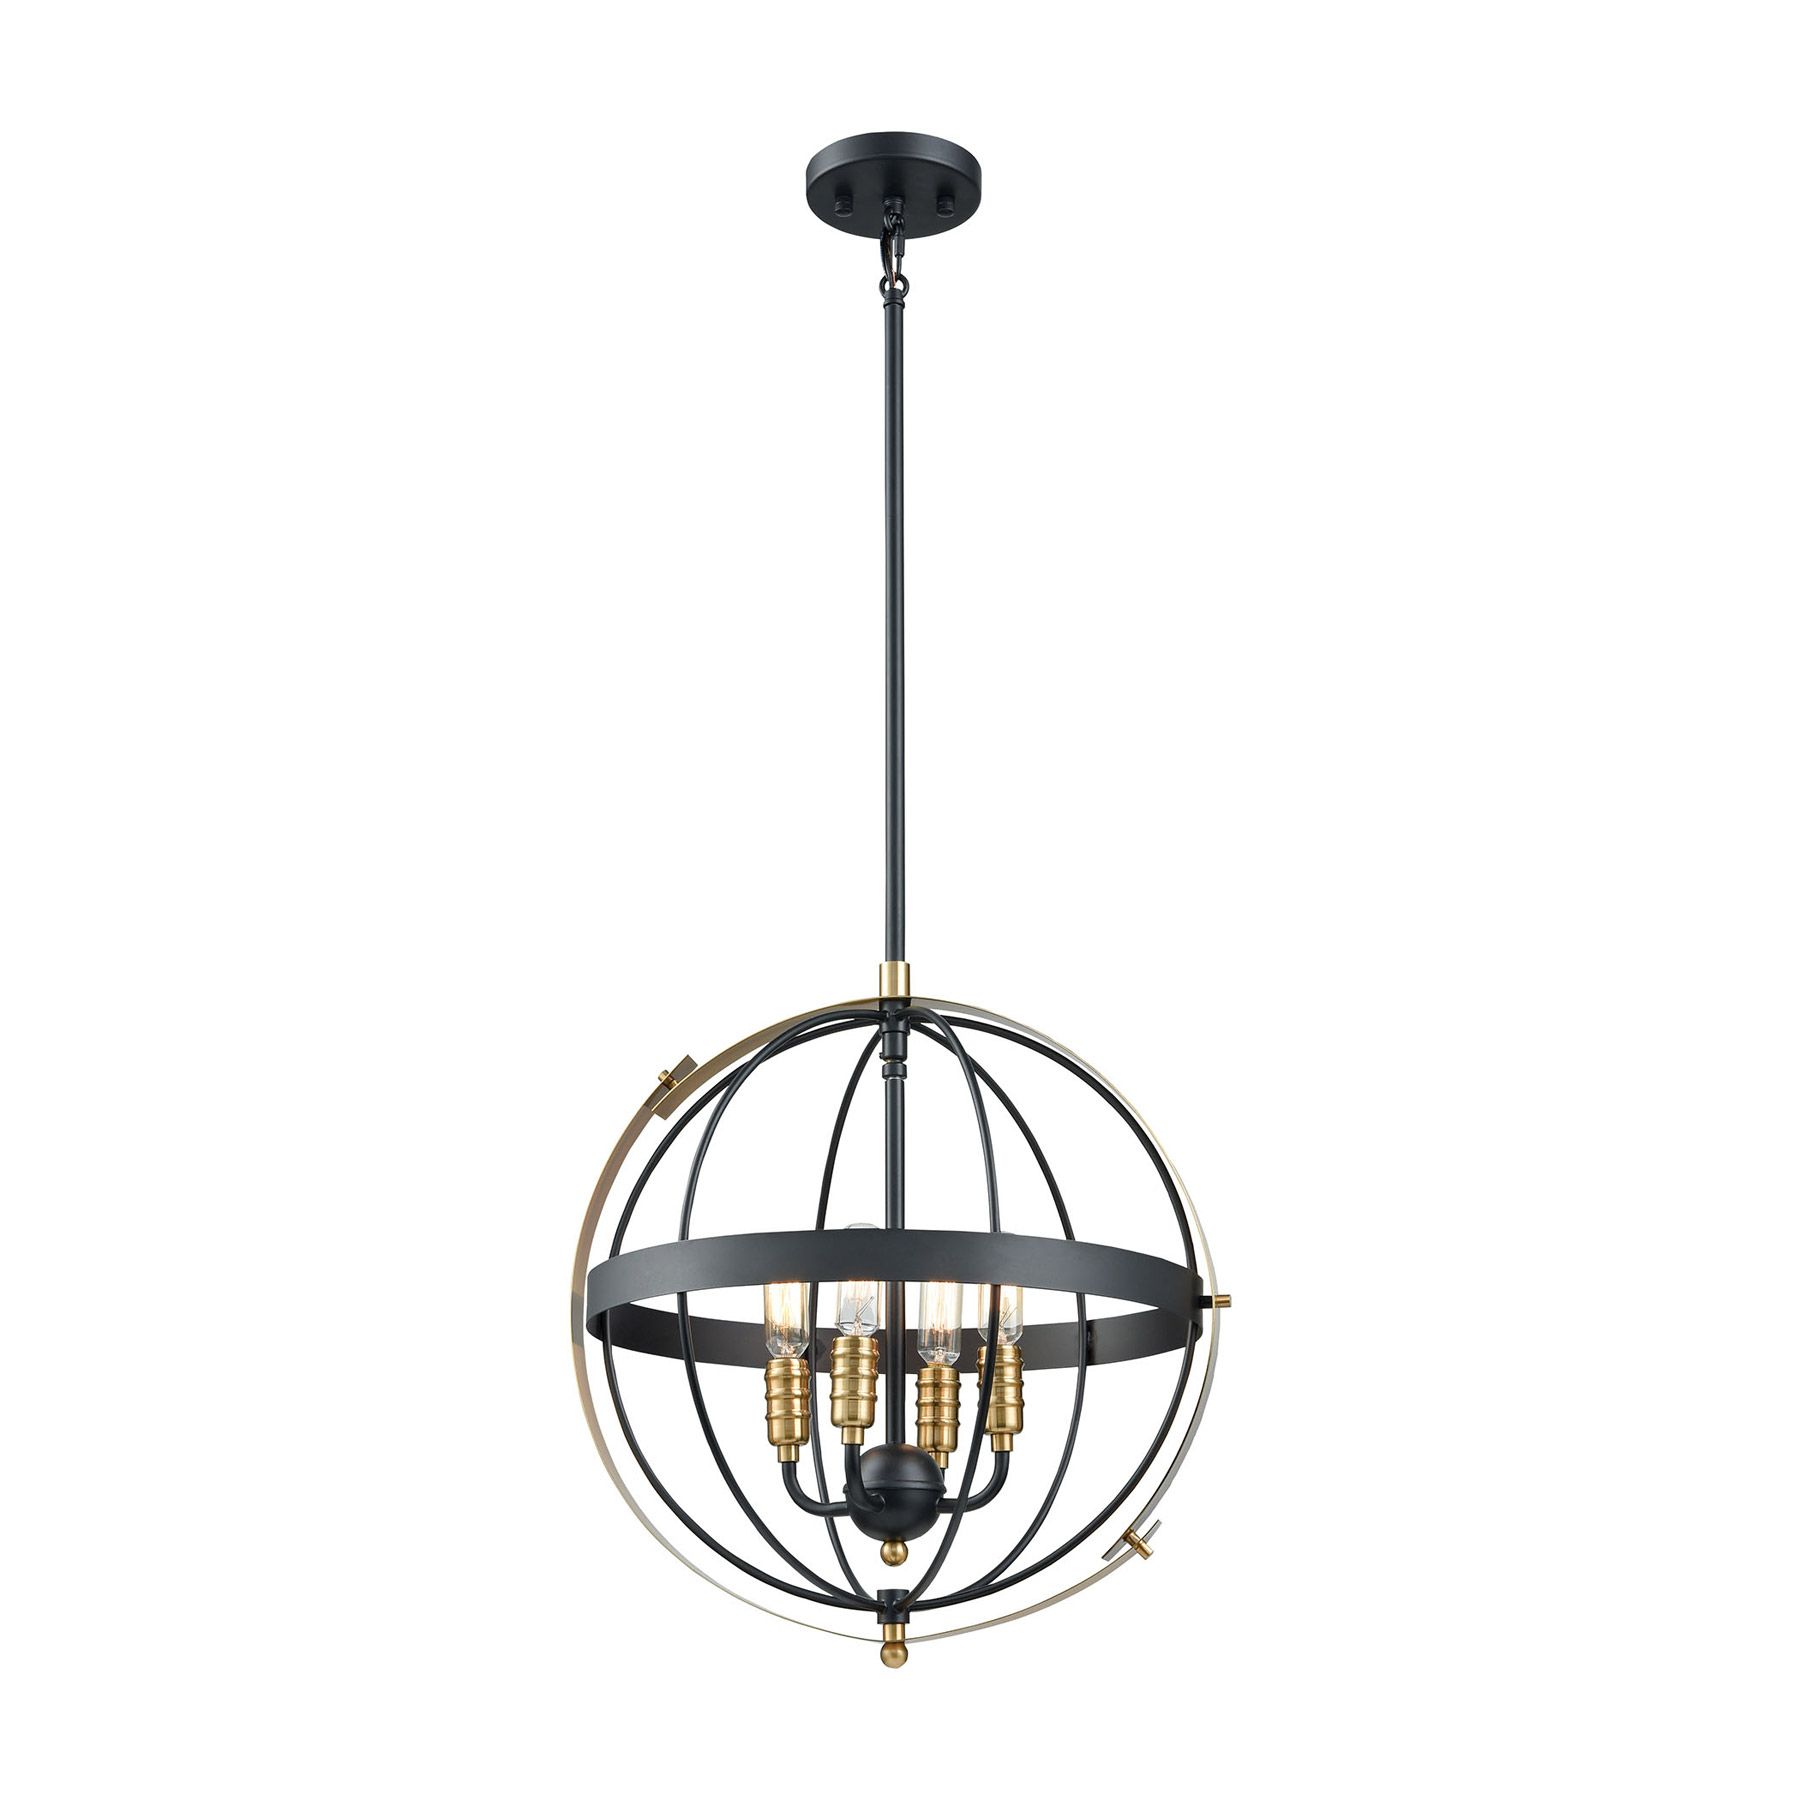 Elk Lighting 15285/4 4 Light Chandelier In Matte Black And Intended For Fashionable Brass Four Light Chandeliers (View 10 of 15)